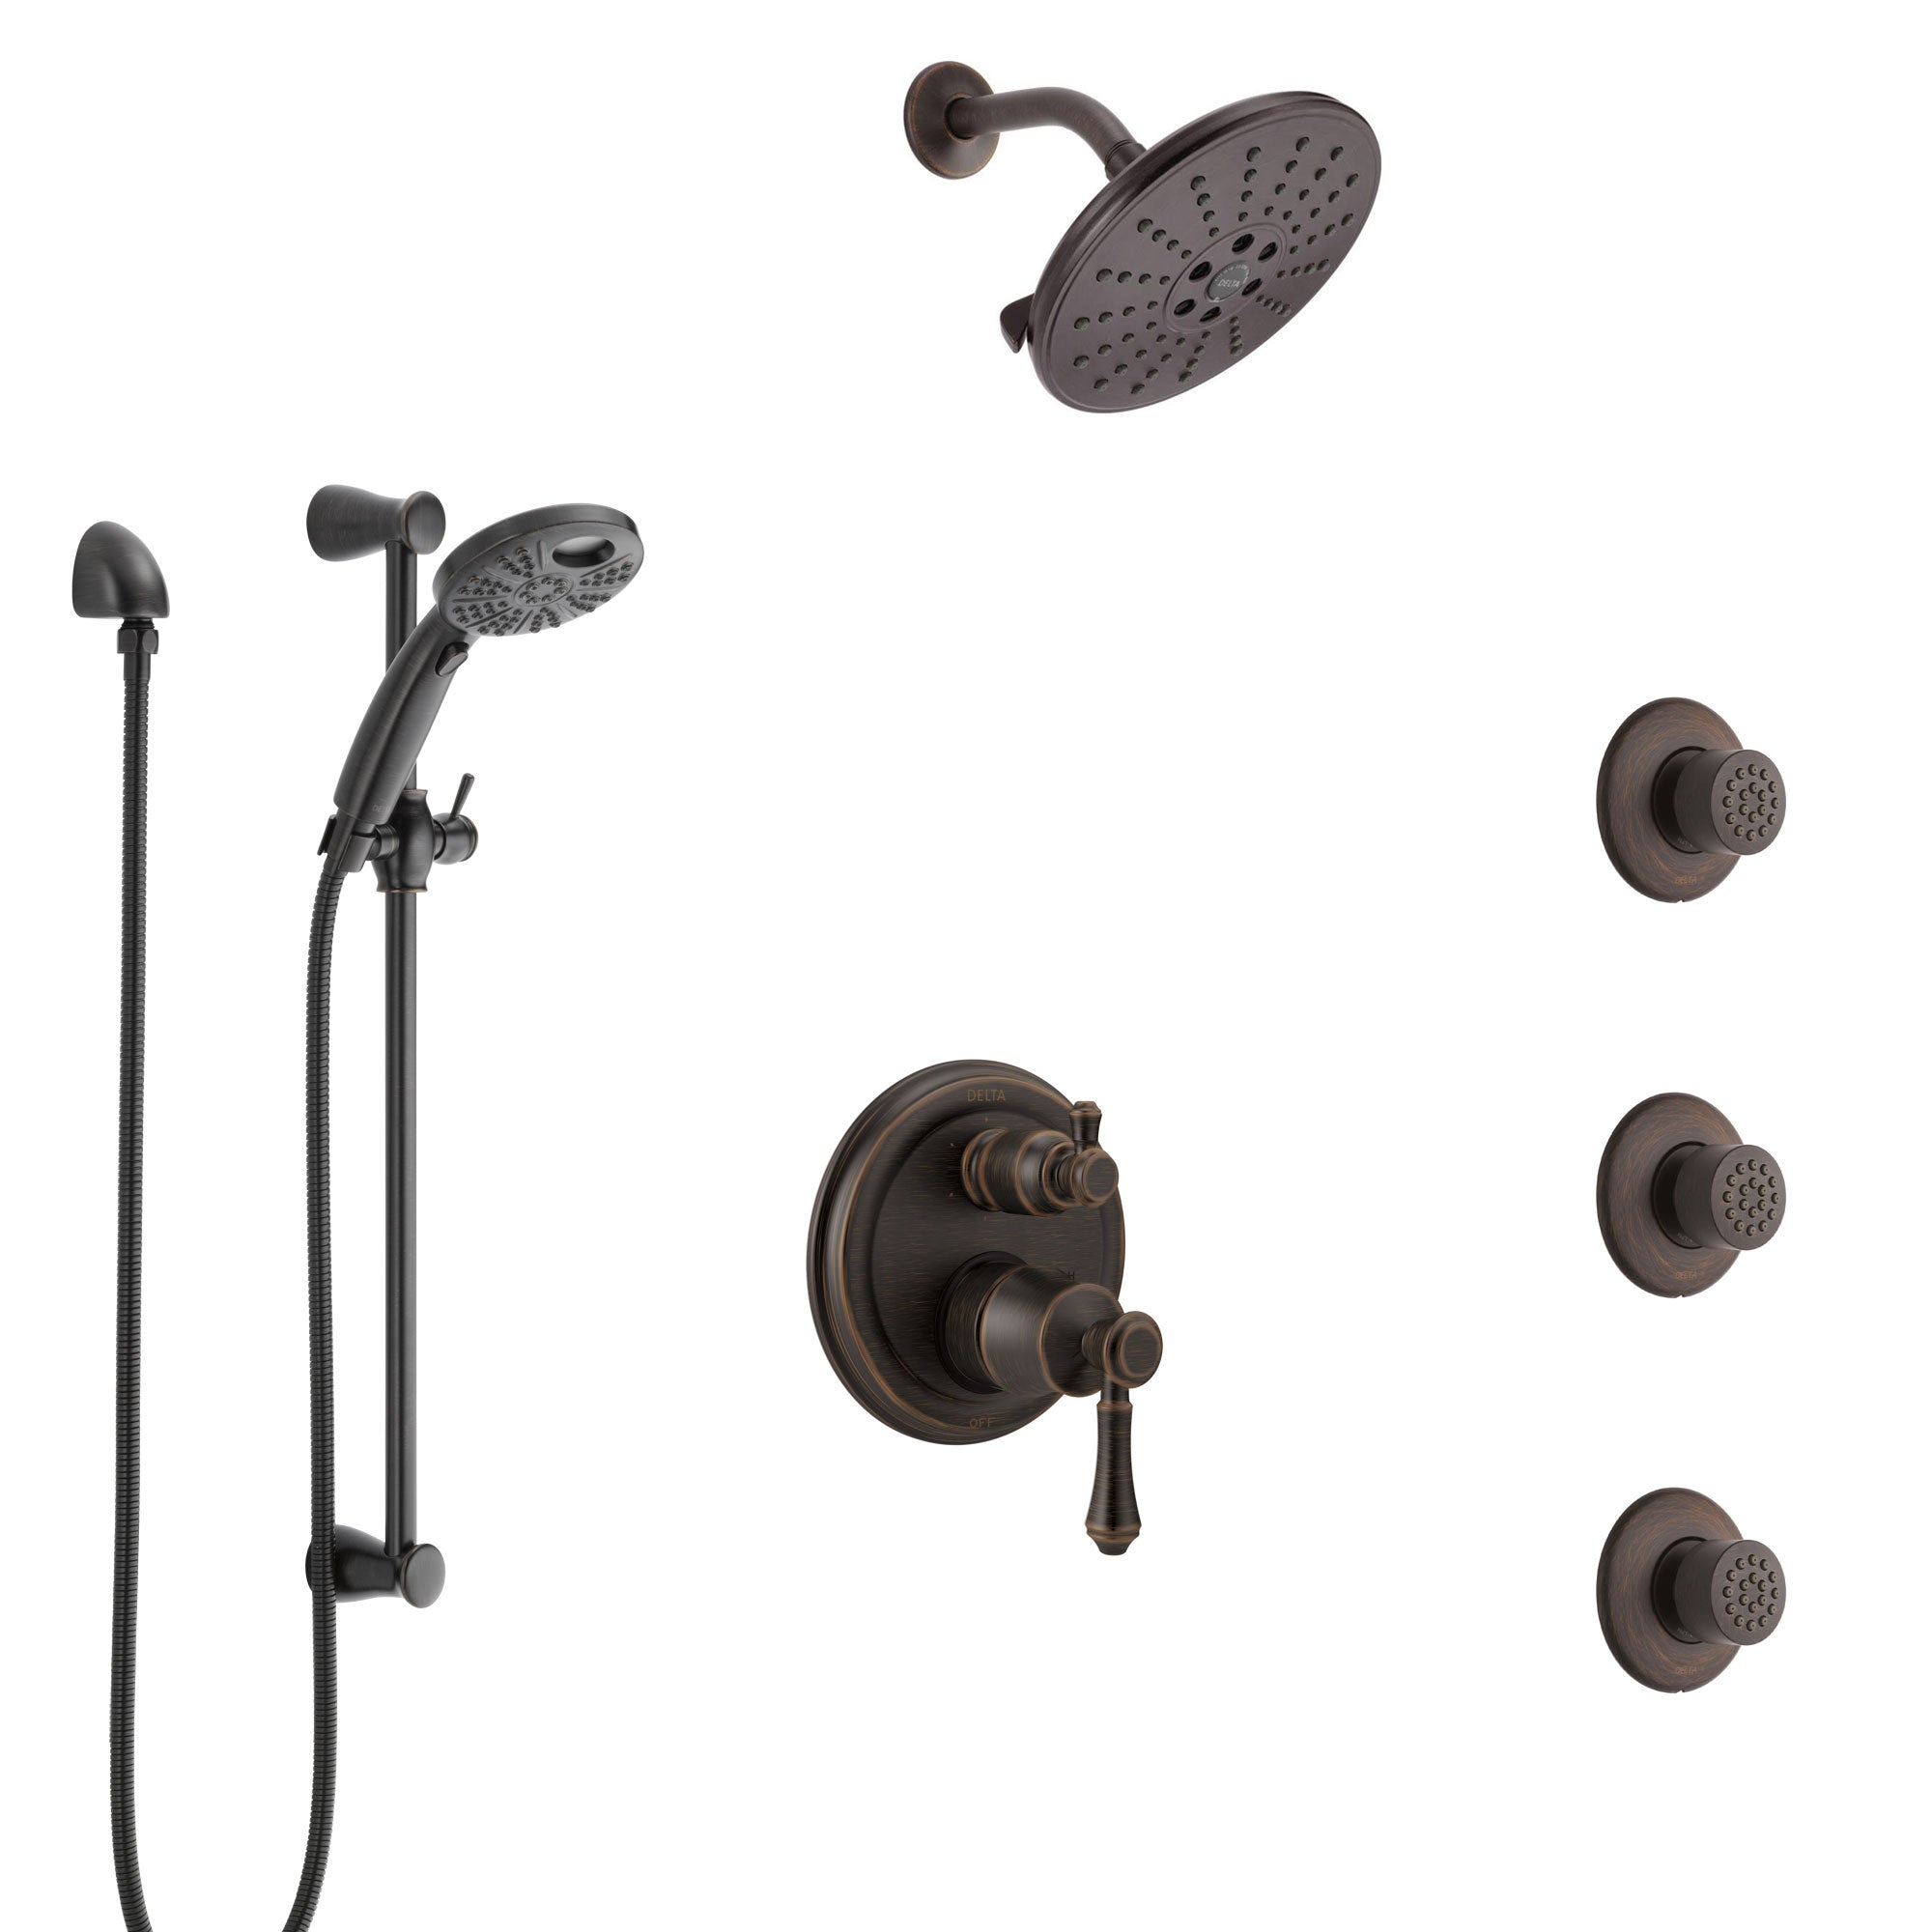 Delta Cassidy Venetian Bronze Shower System with Control, Integrated 6-Setting Diverter, Showerhead, 3 Body Sprays, and Temp2O Hand Shower SS24997RB5